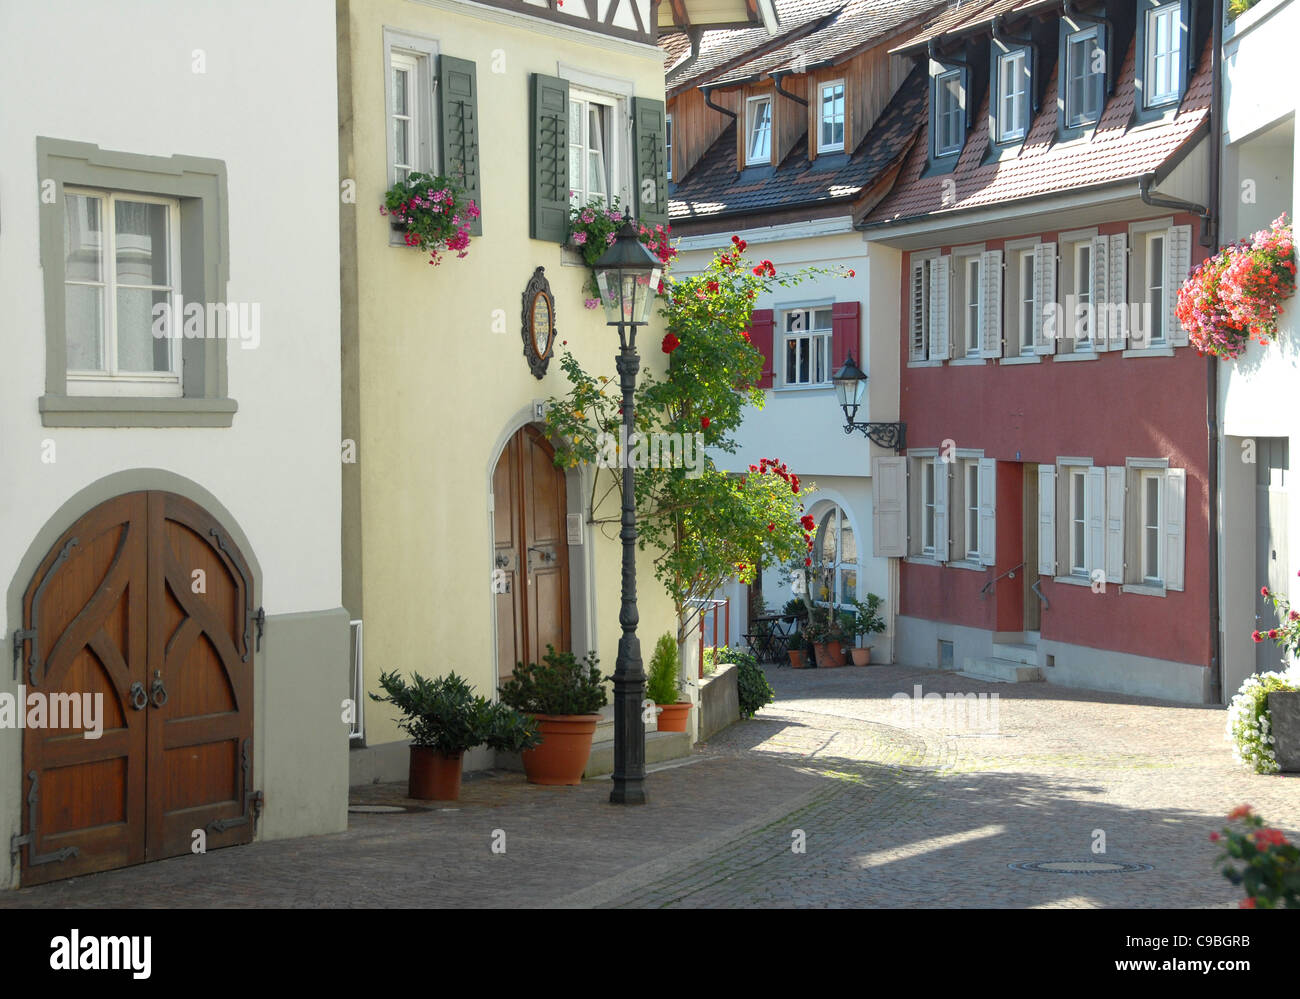 Ulrichstraße at Markdorf in Upper Swabia with traditional German house facades Stock Photo